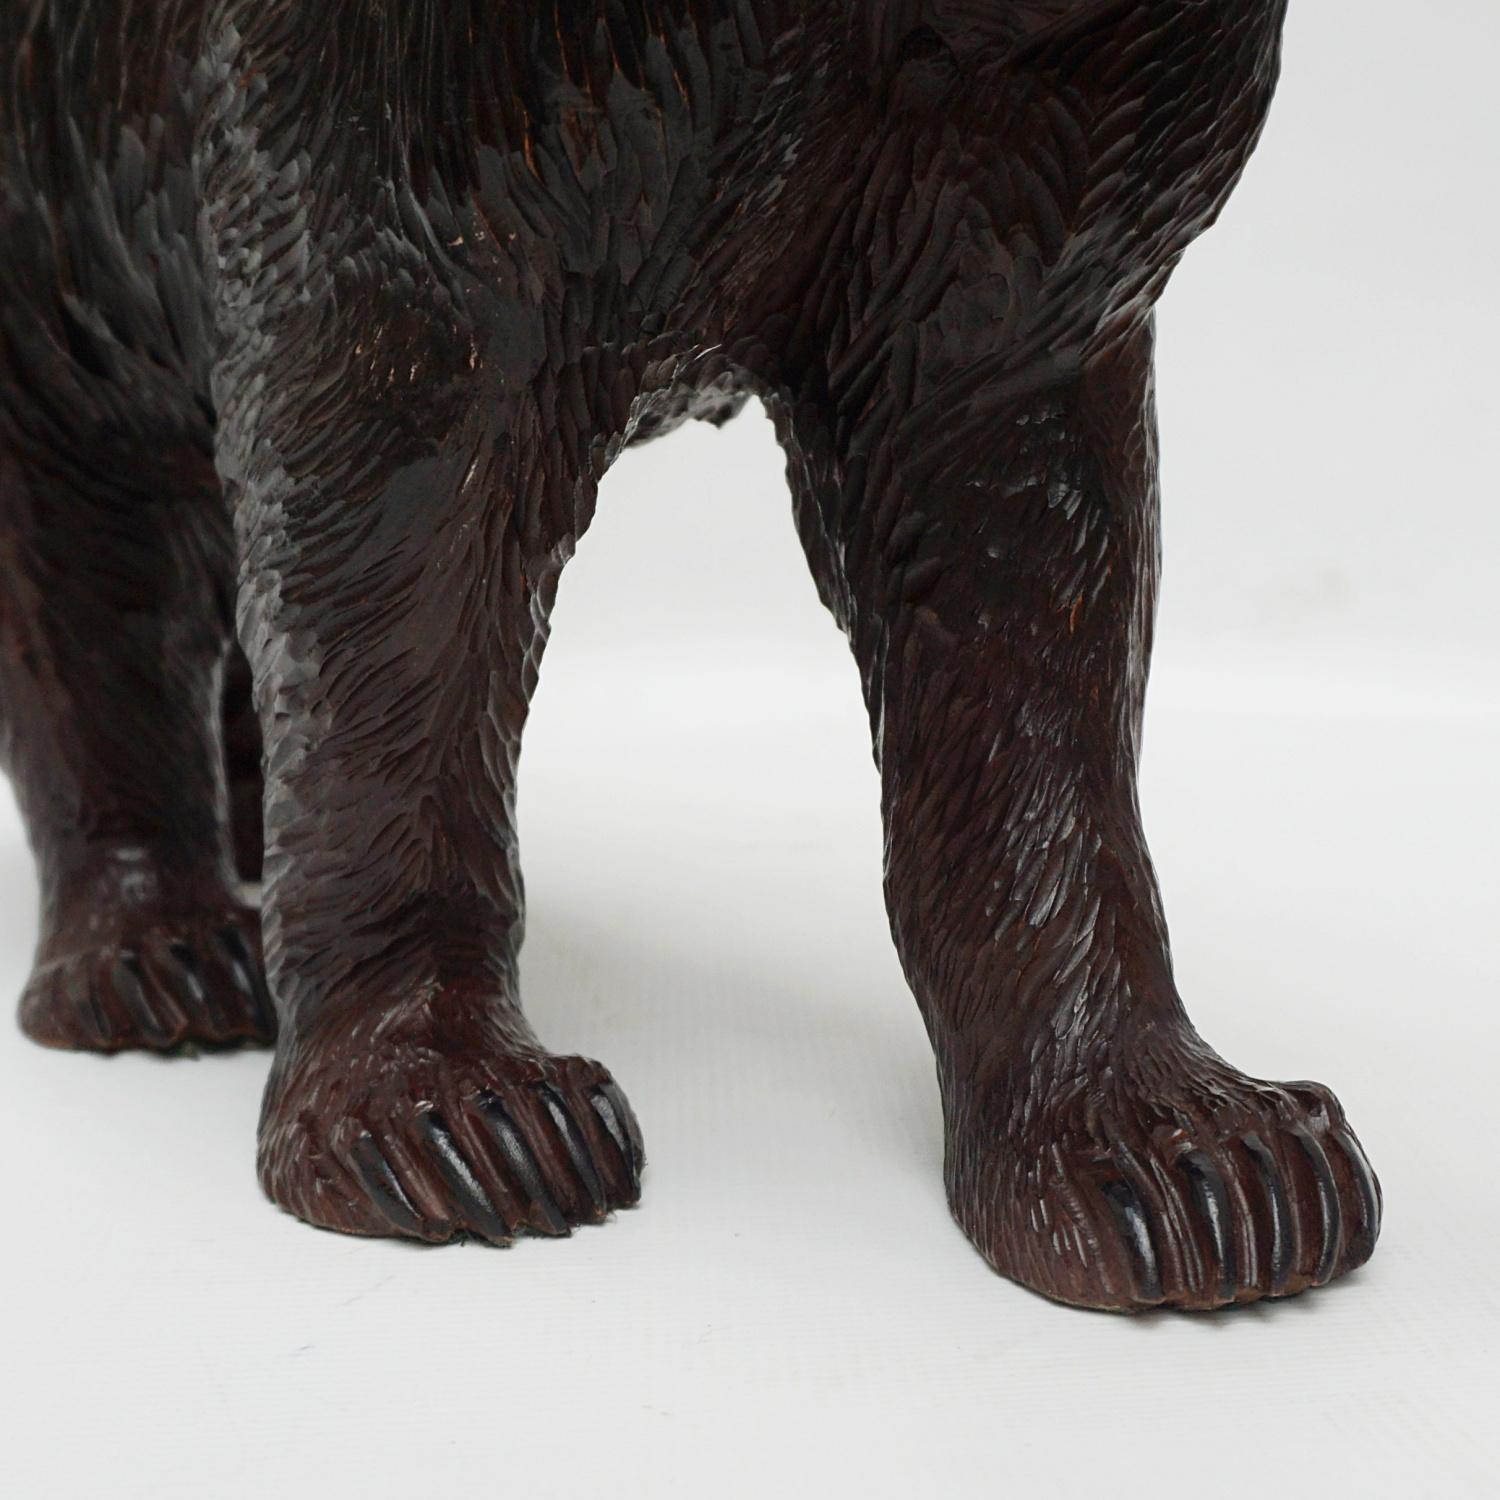 Wood Black Forest Carved Bear Swiss Circa 1890